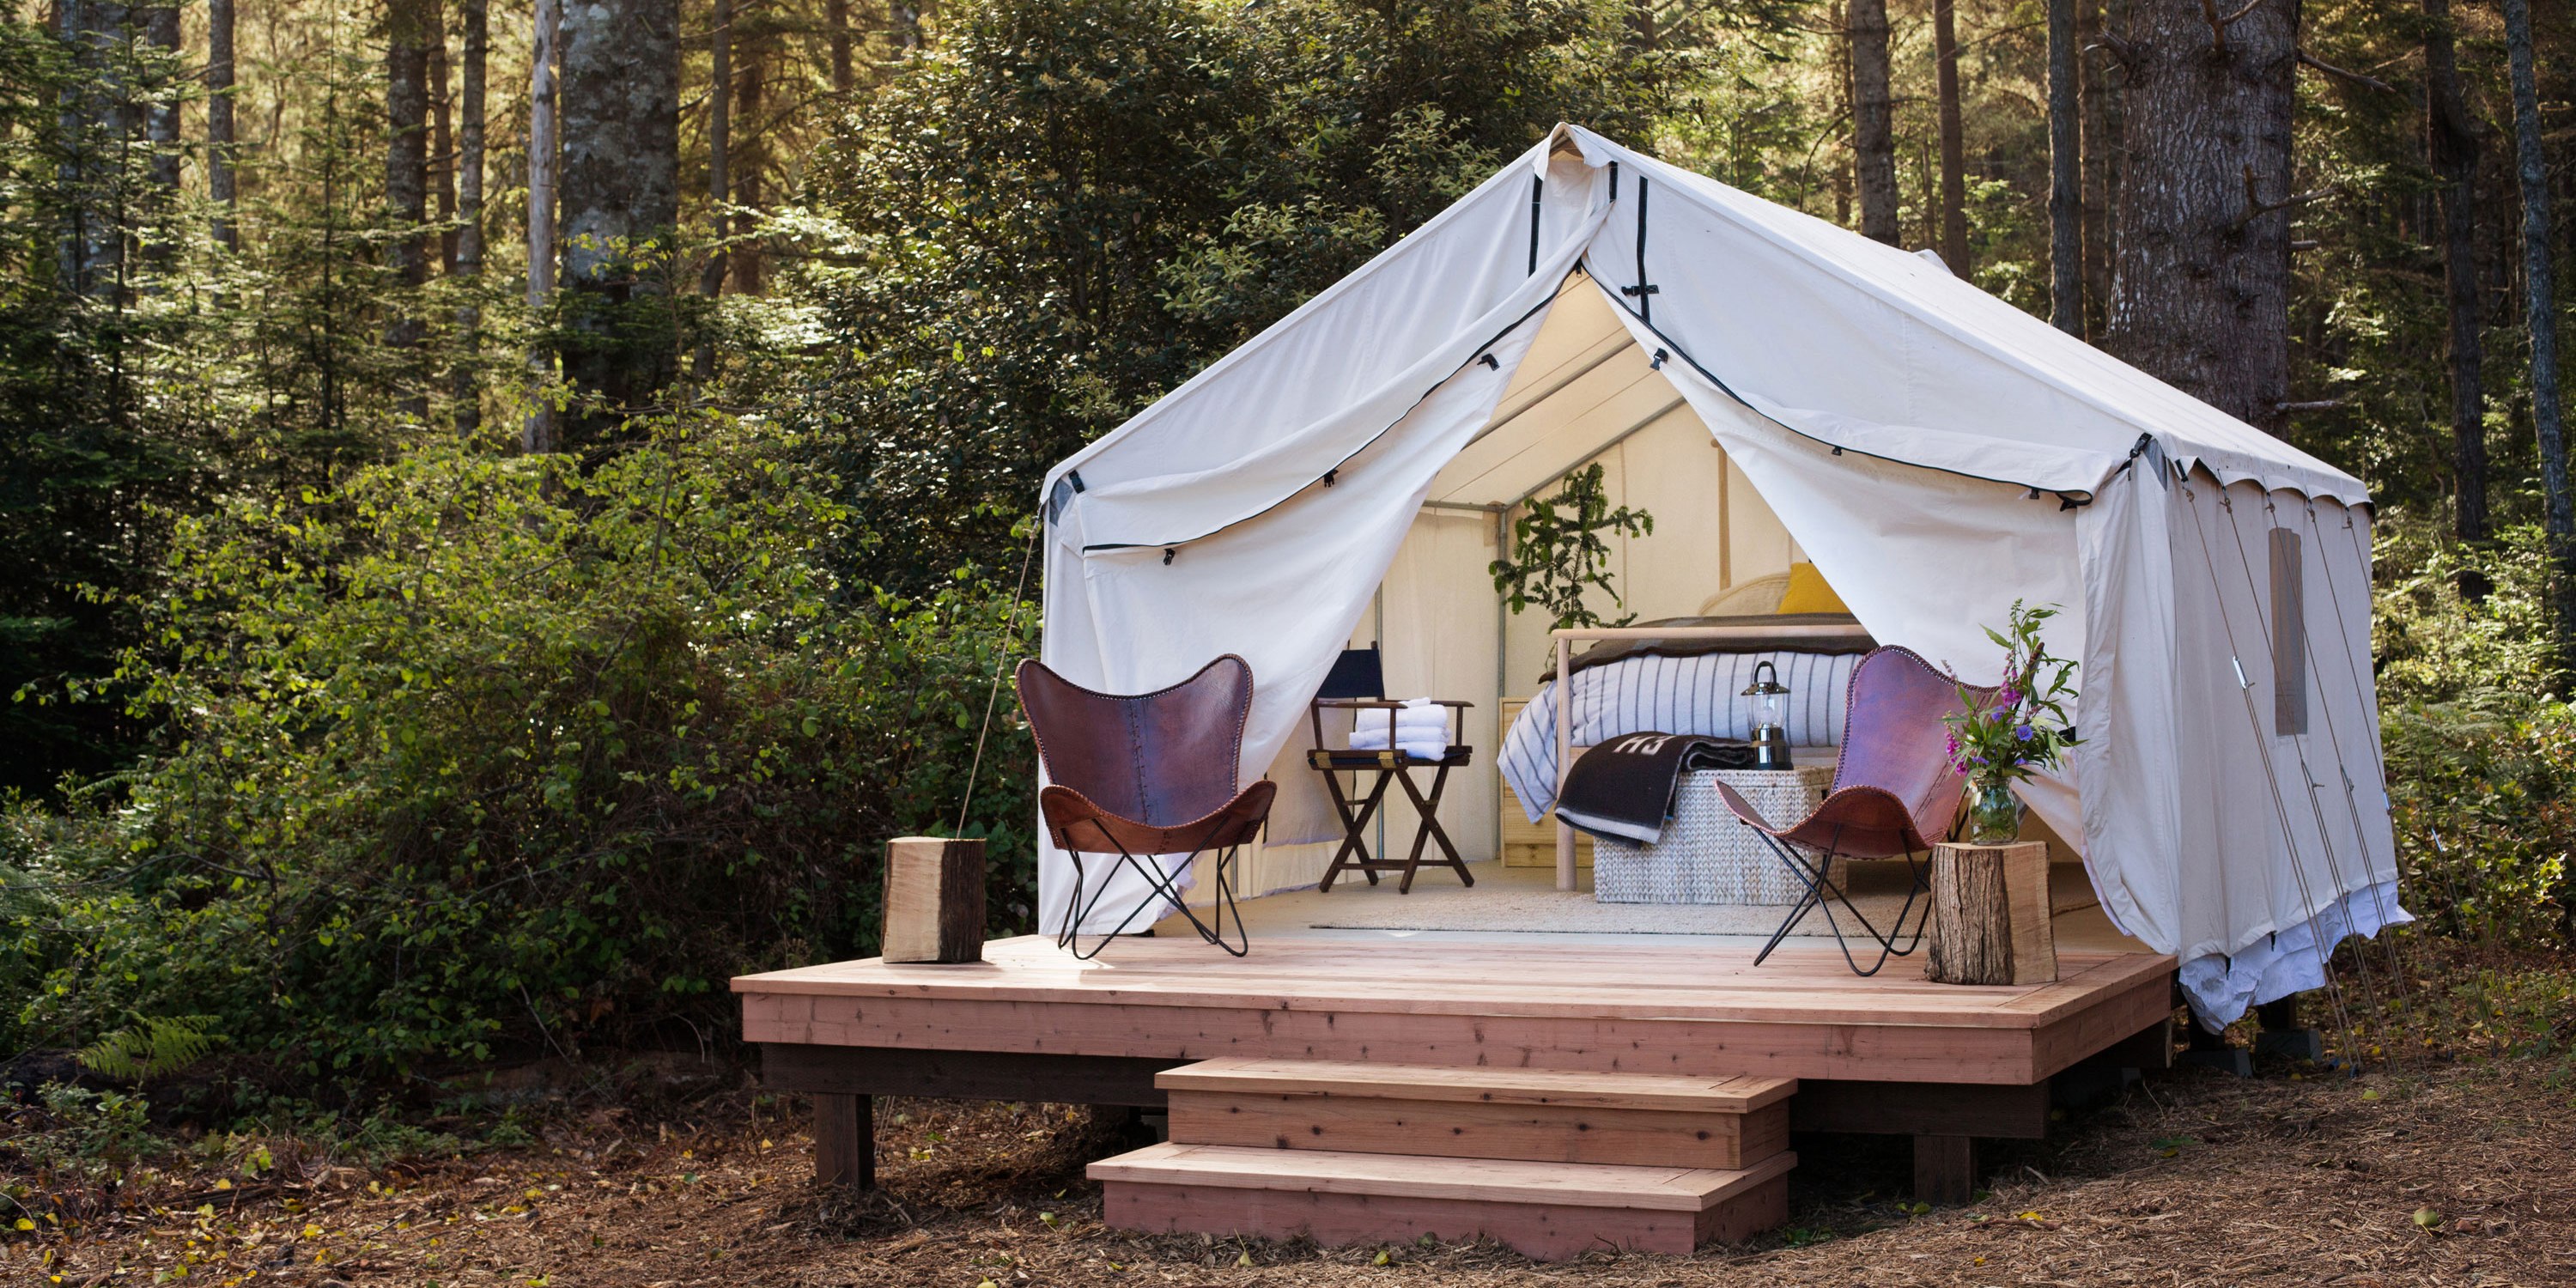 Glamping Destinations in California and Wyoming